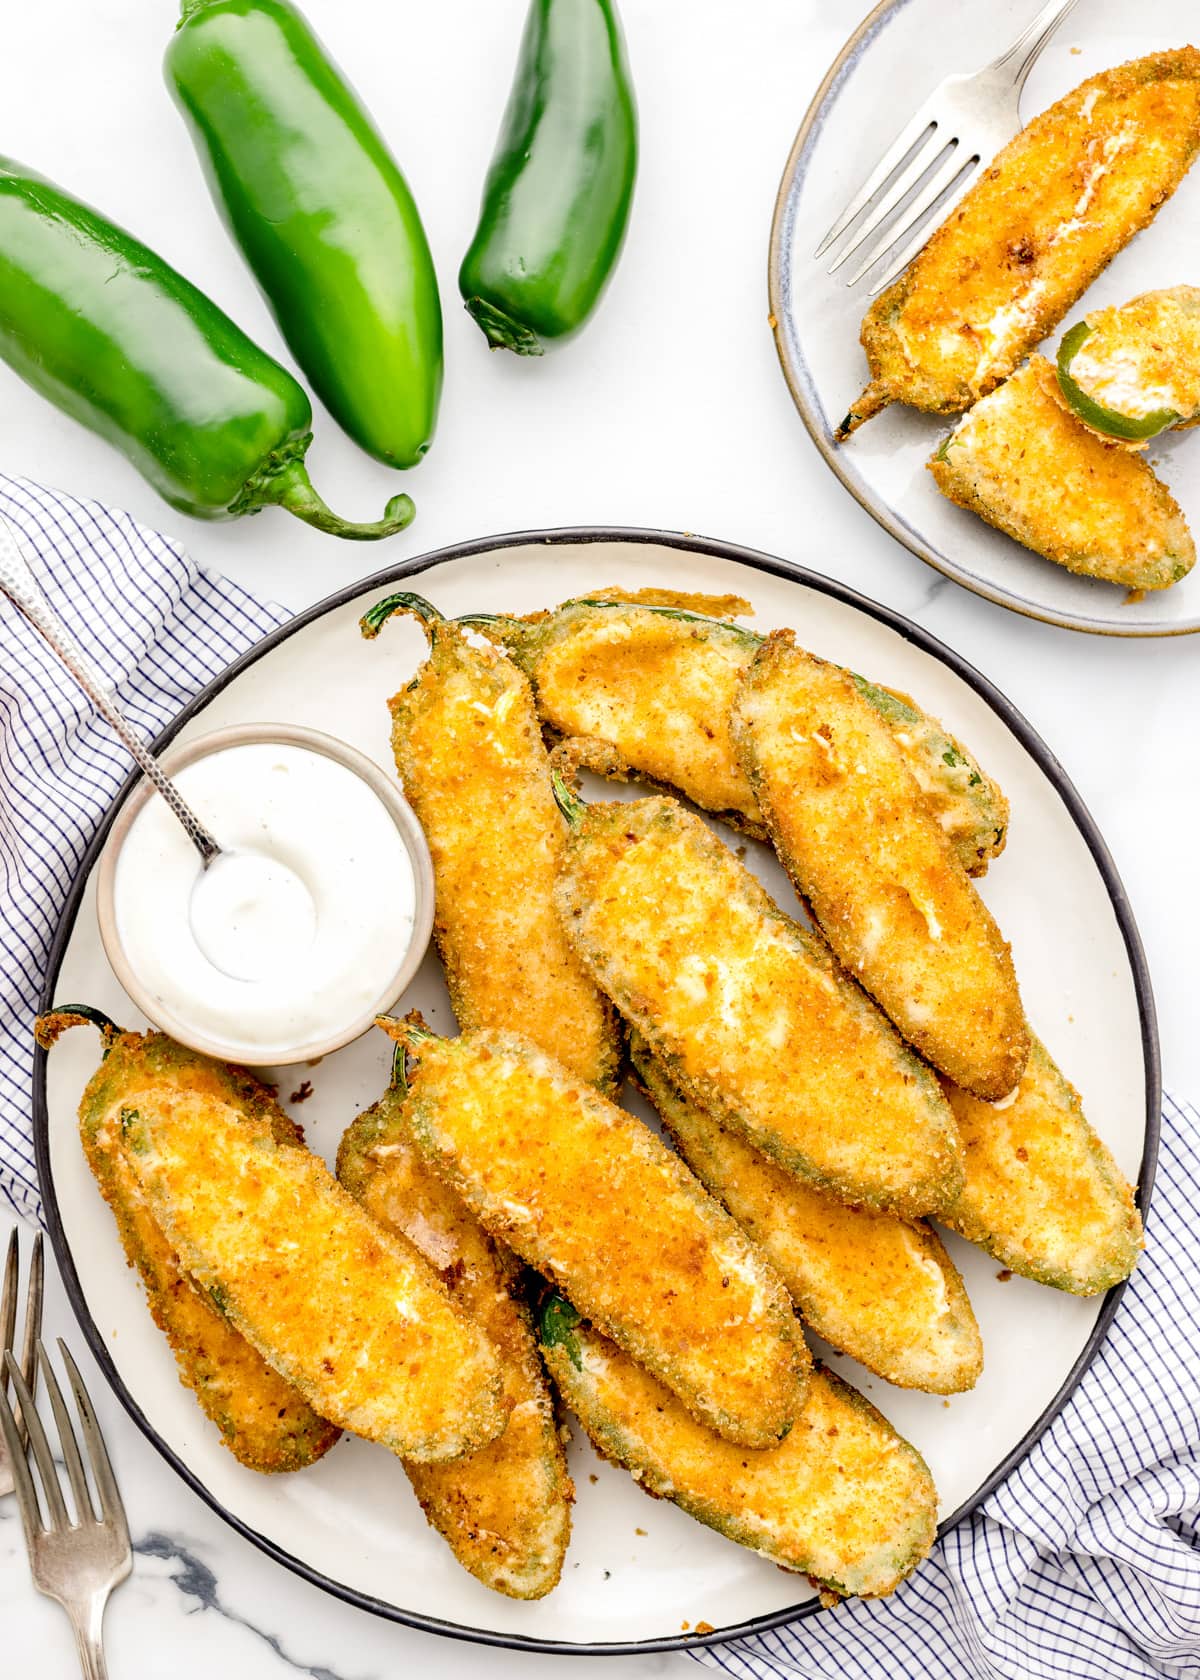 A plate of jalapeno poppers served with ranch dressing.